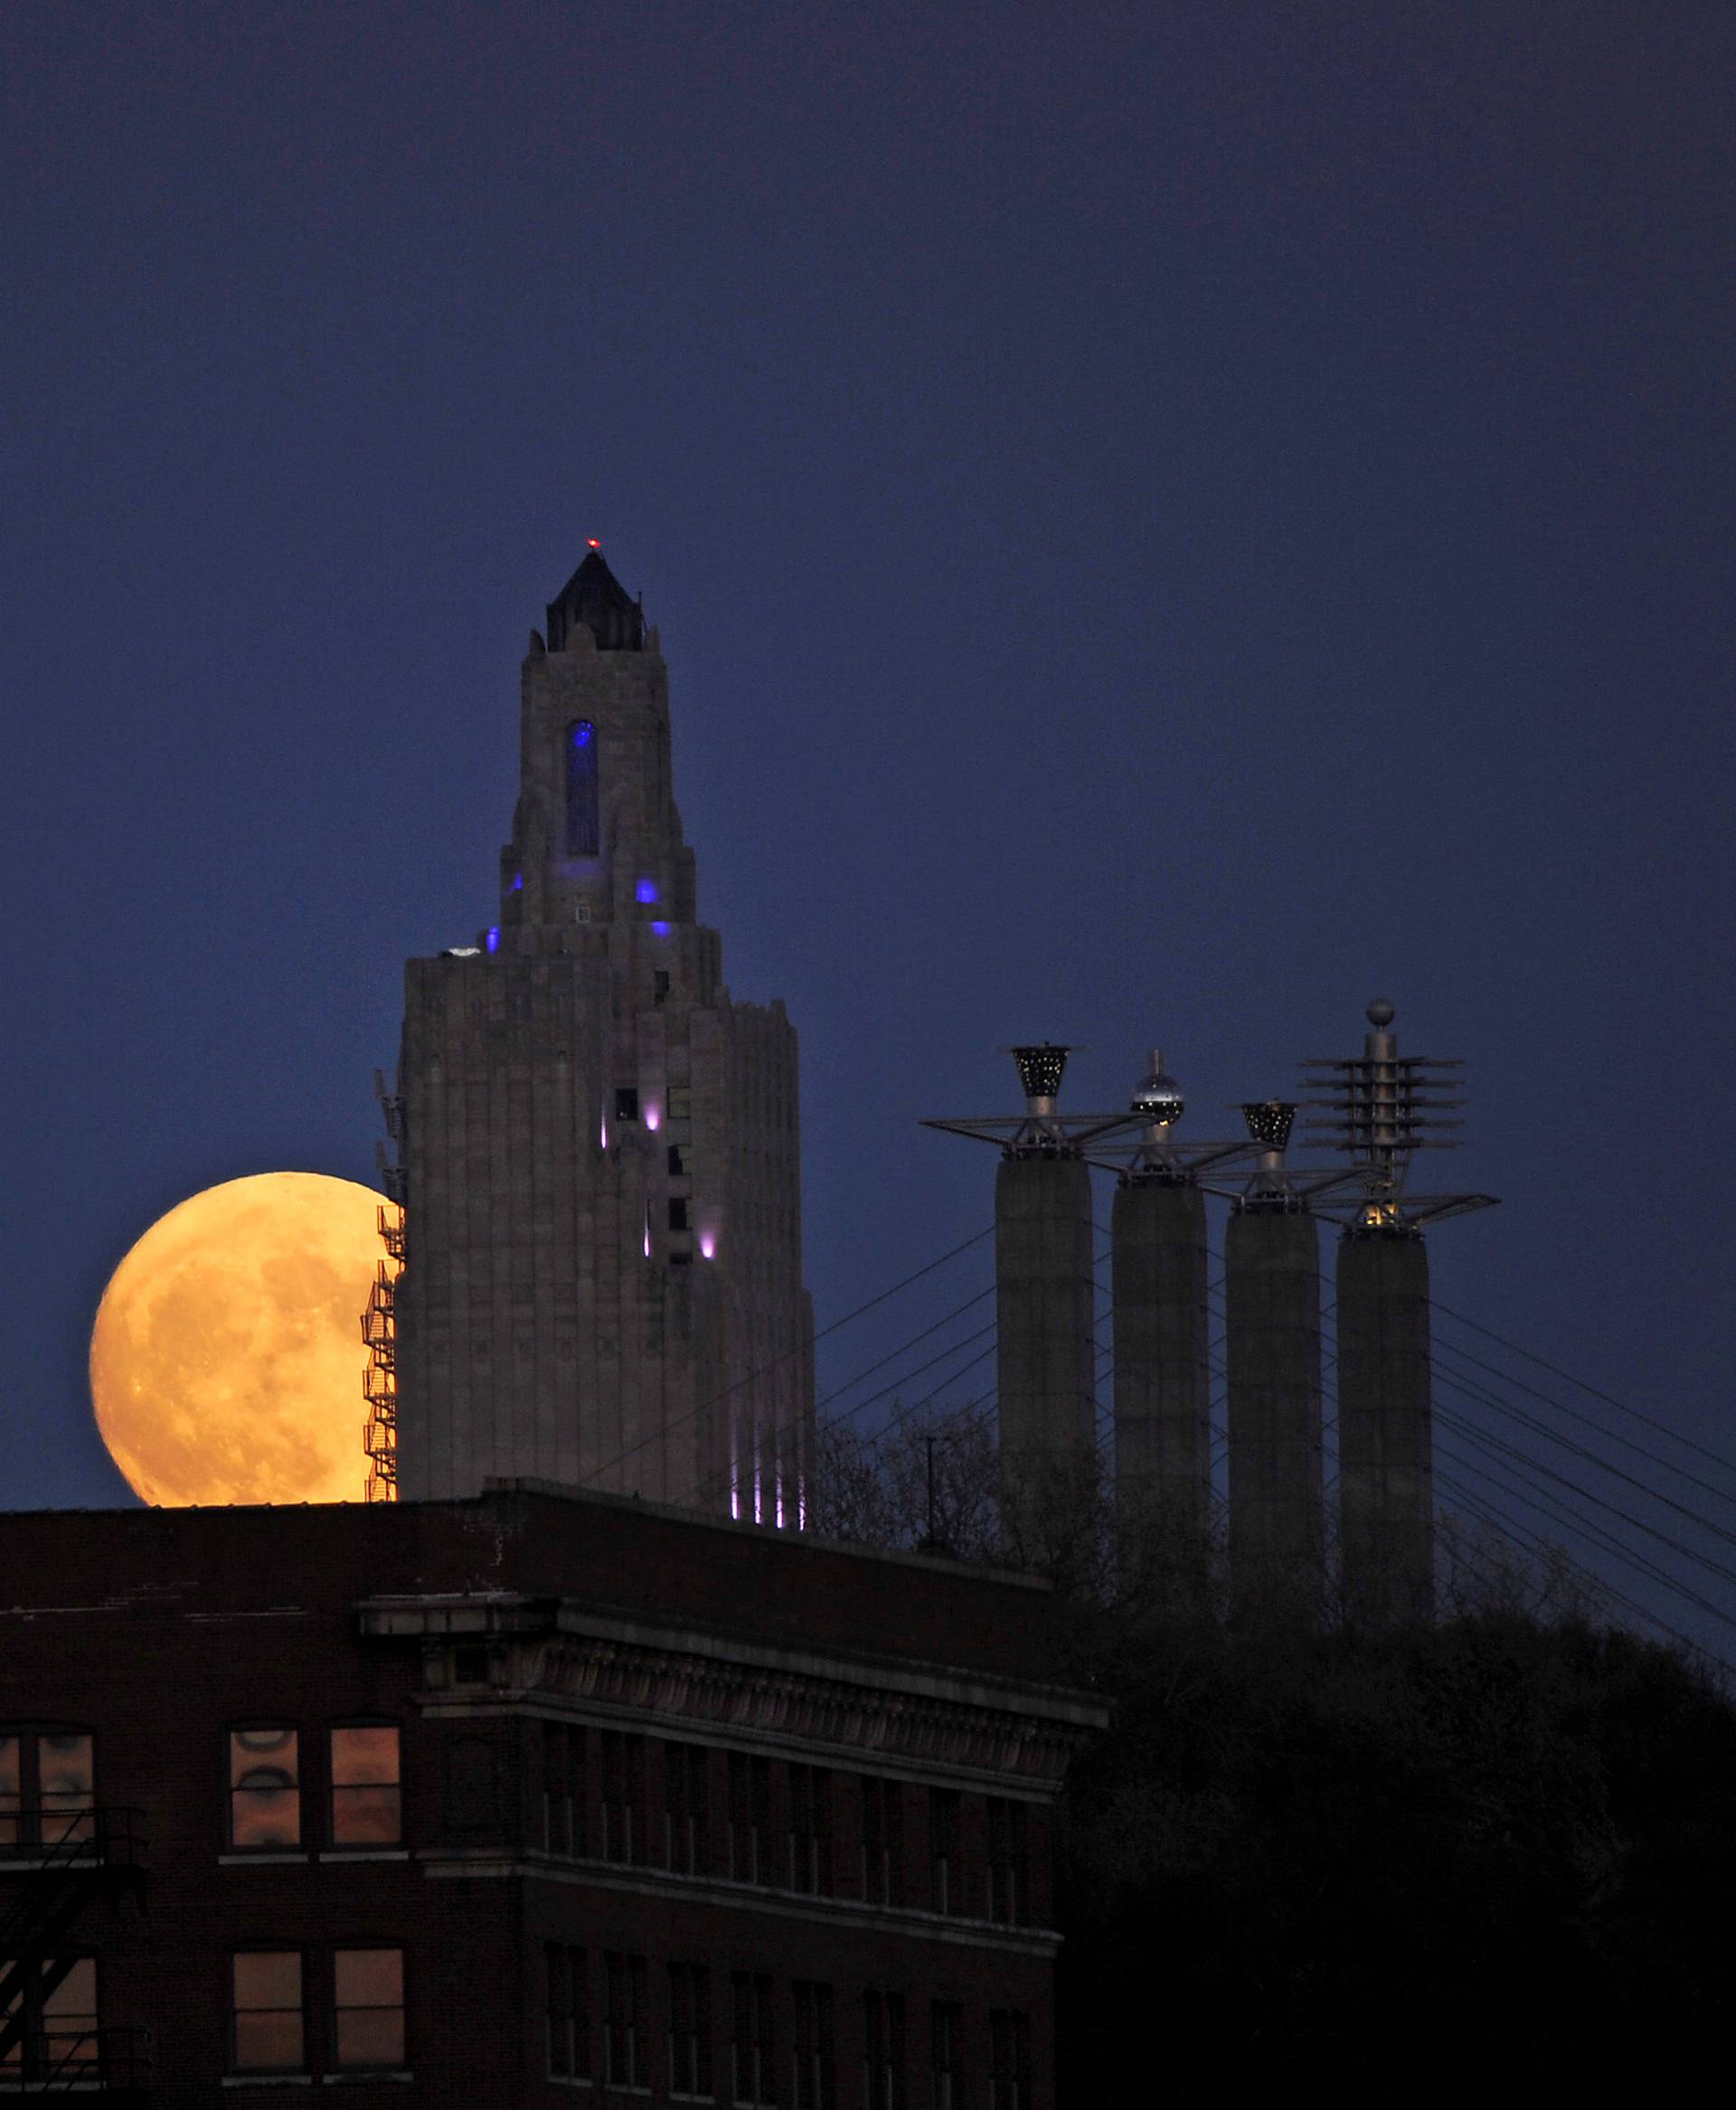 The "supermoon", the closest the moon comes to Earth since 1948, rises over the Power and Light building in downtown Kansas City, Missouri